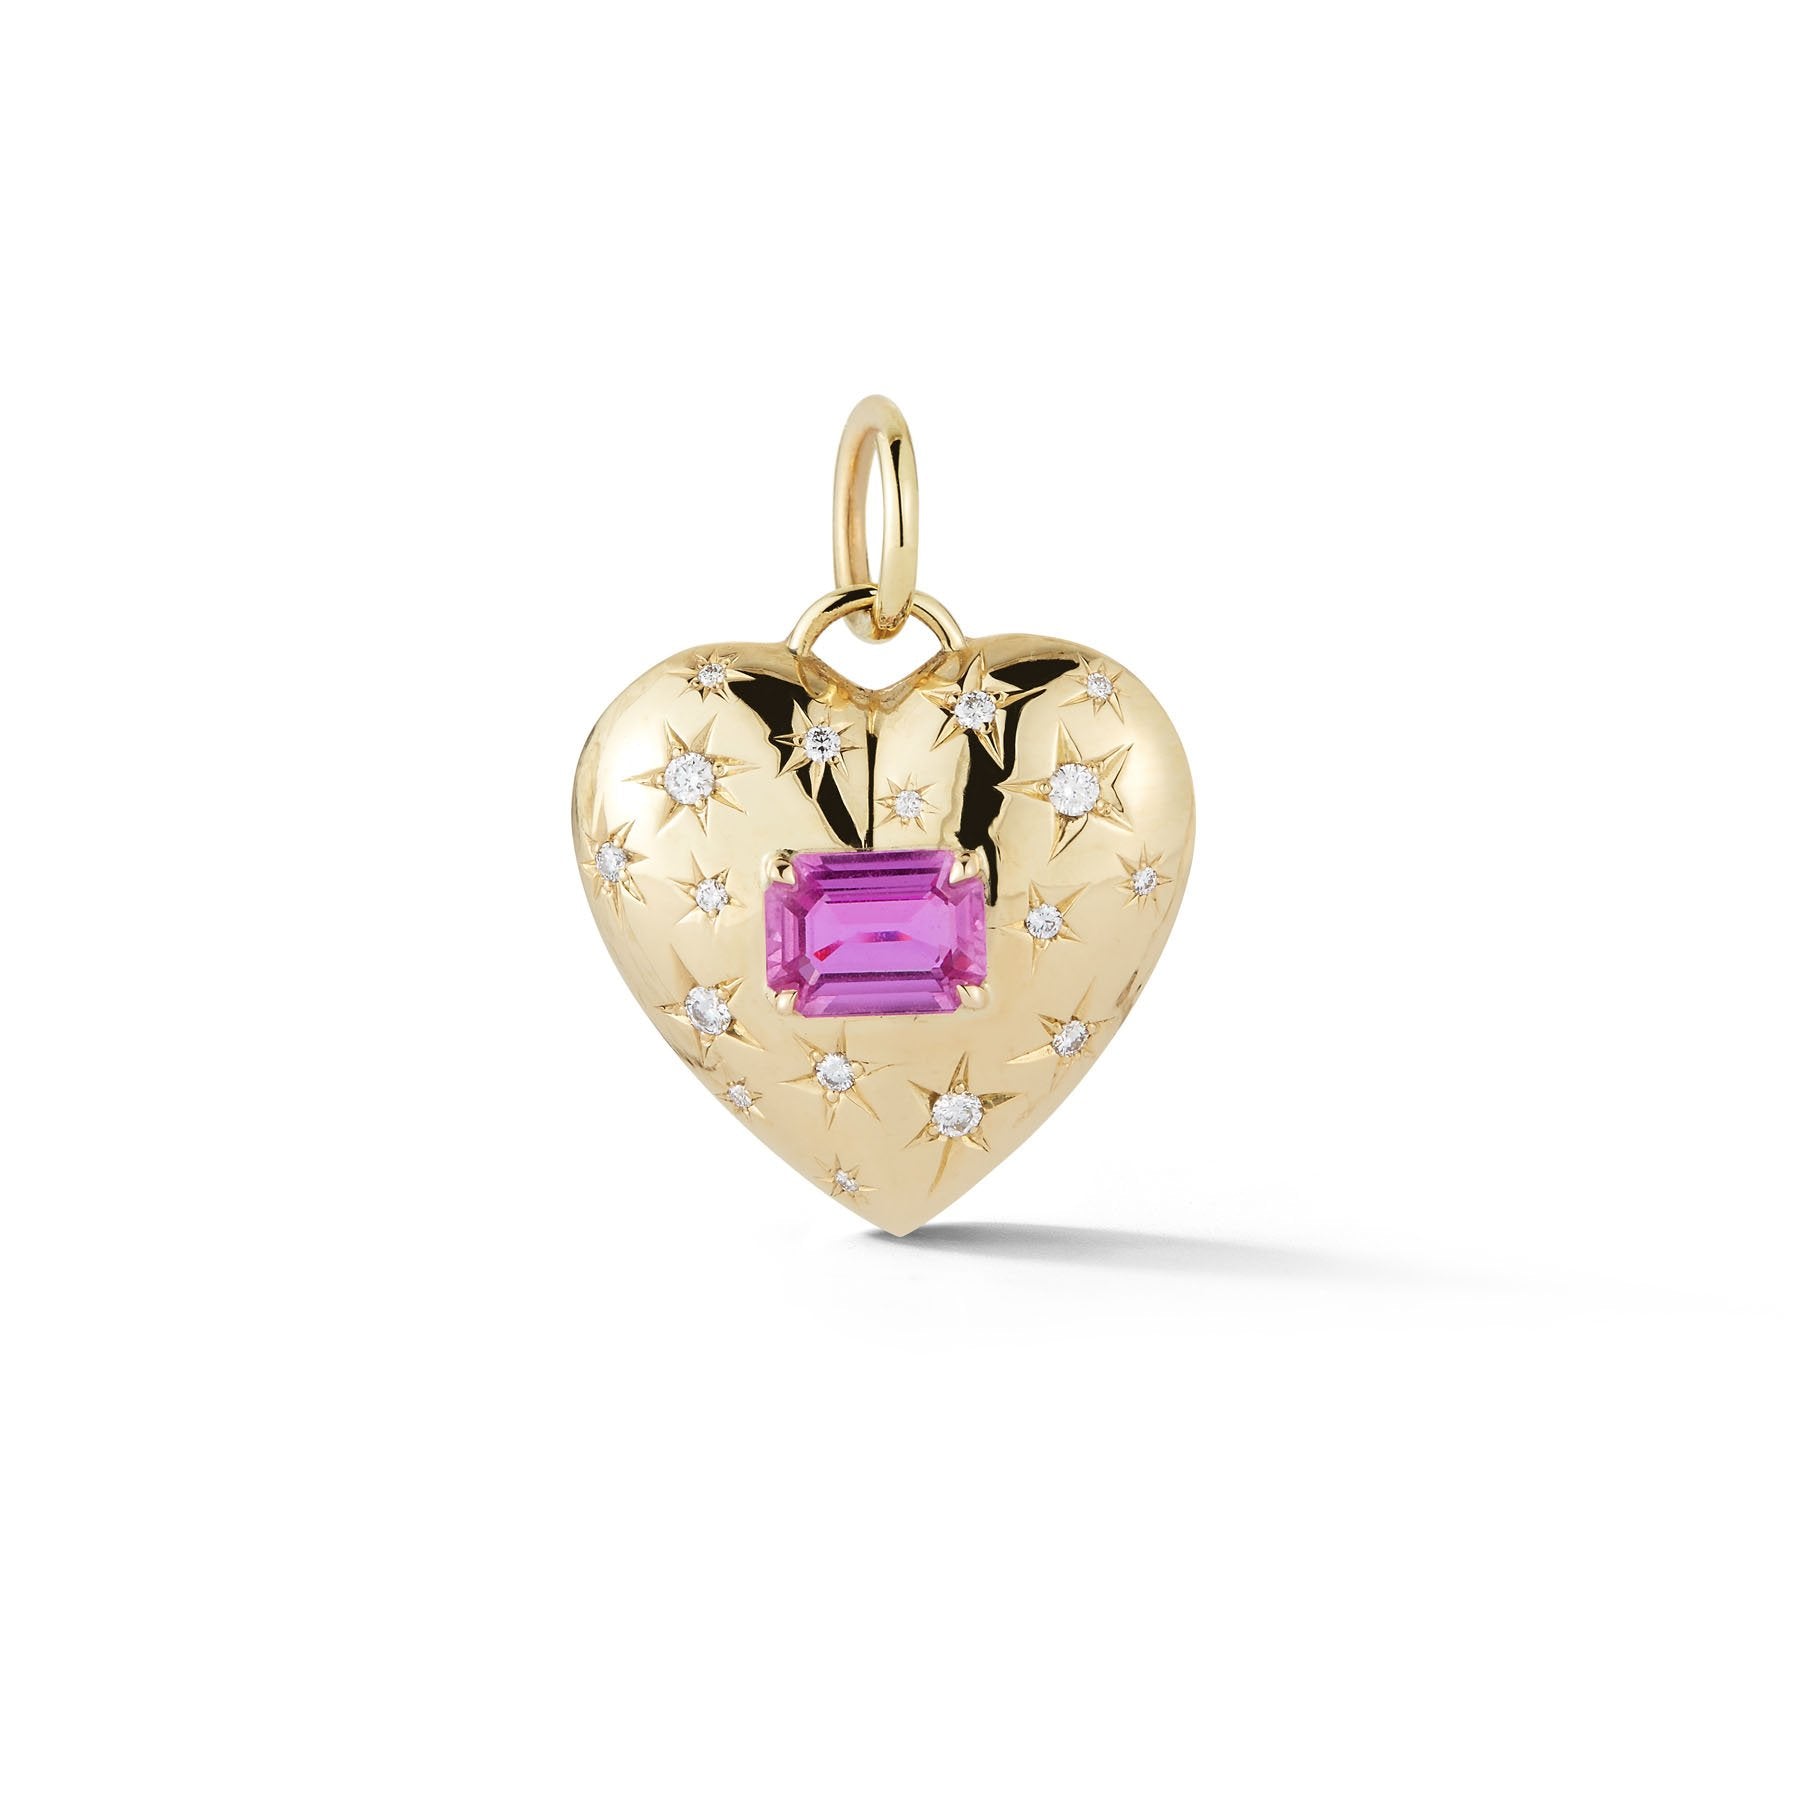 Pink sapphire and diamond necklace, Important Jewels